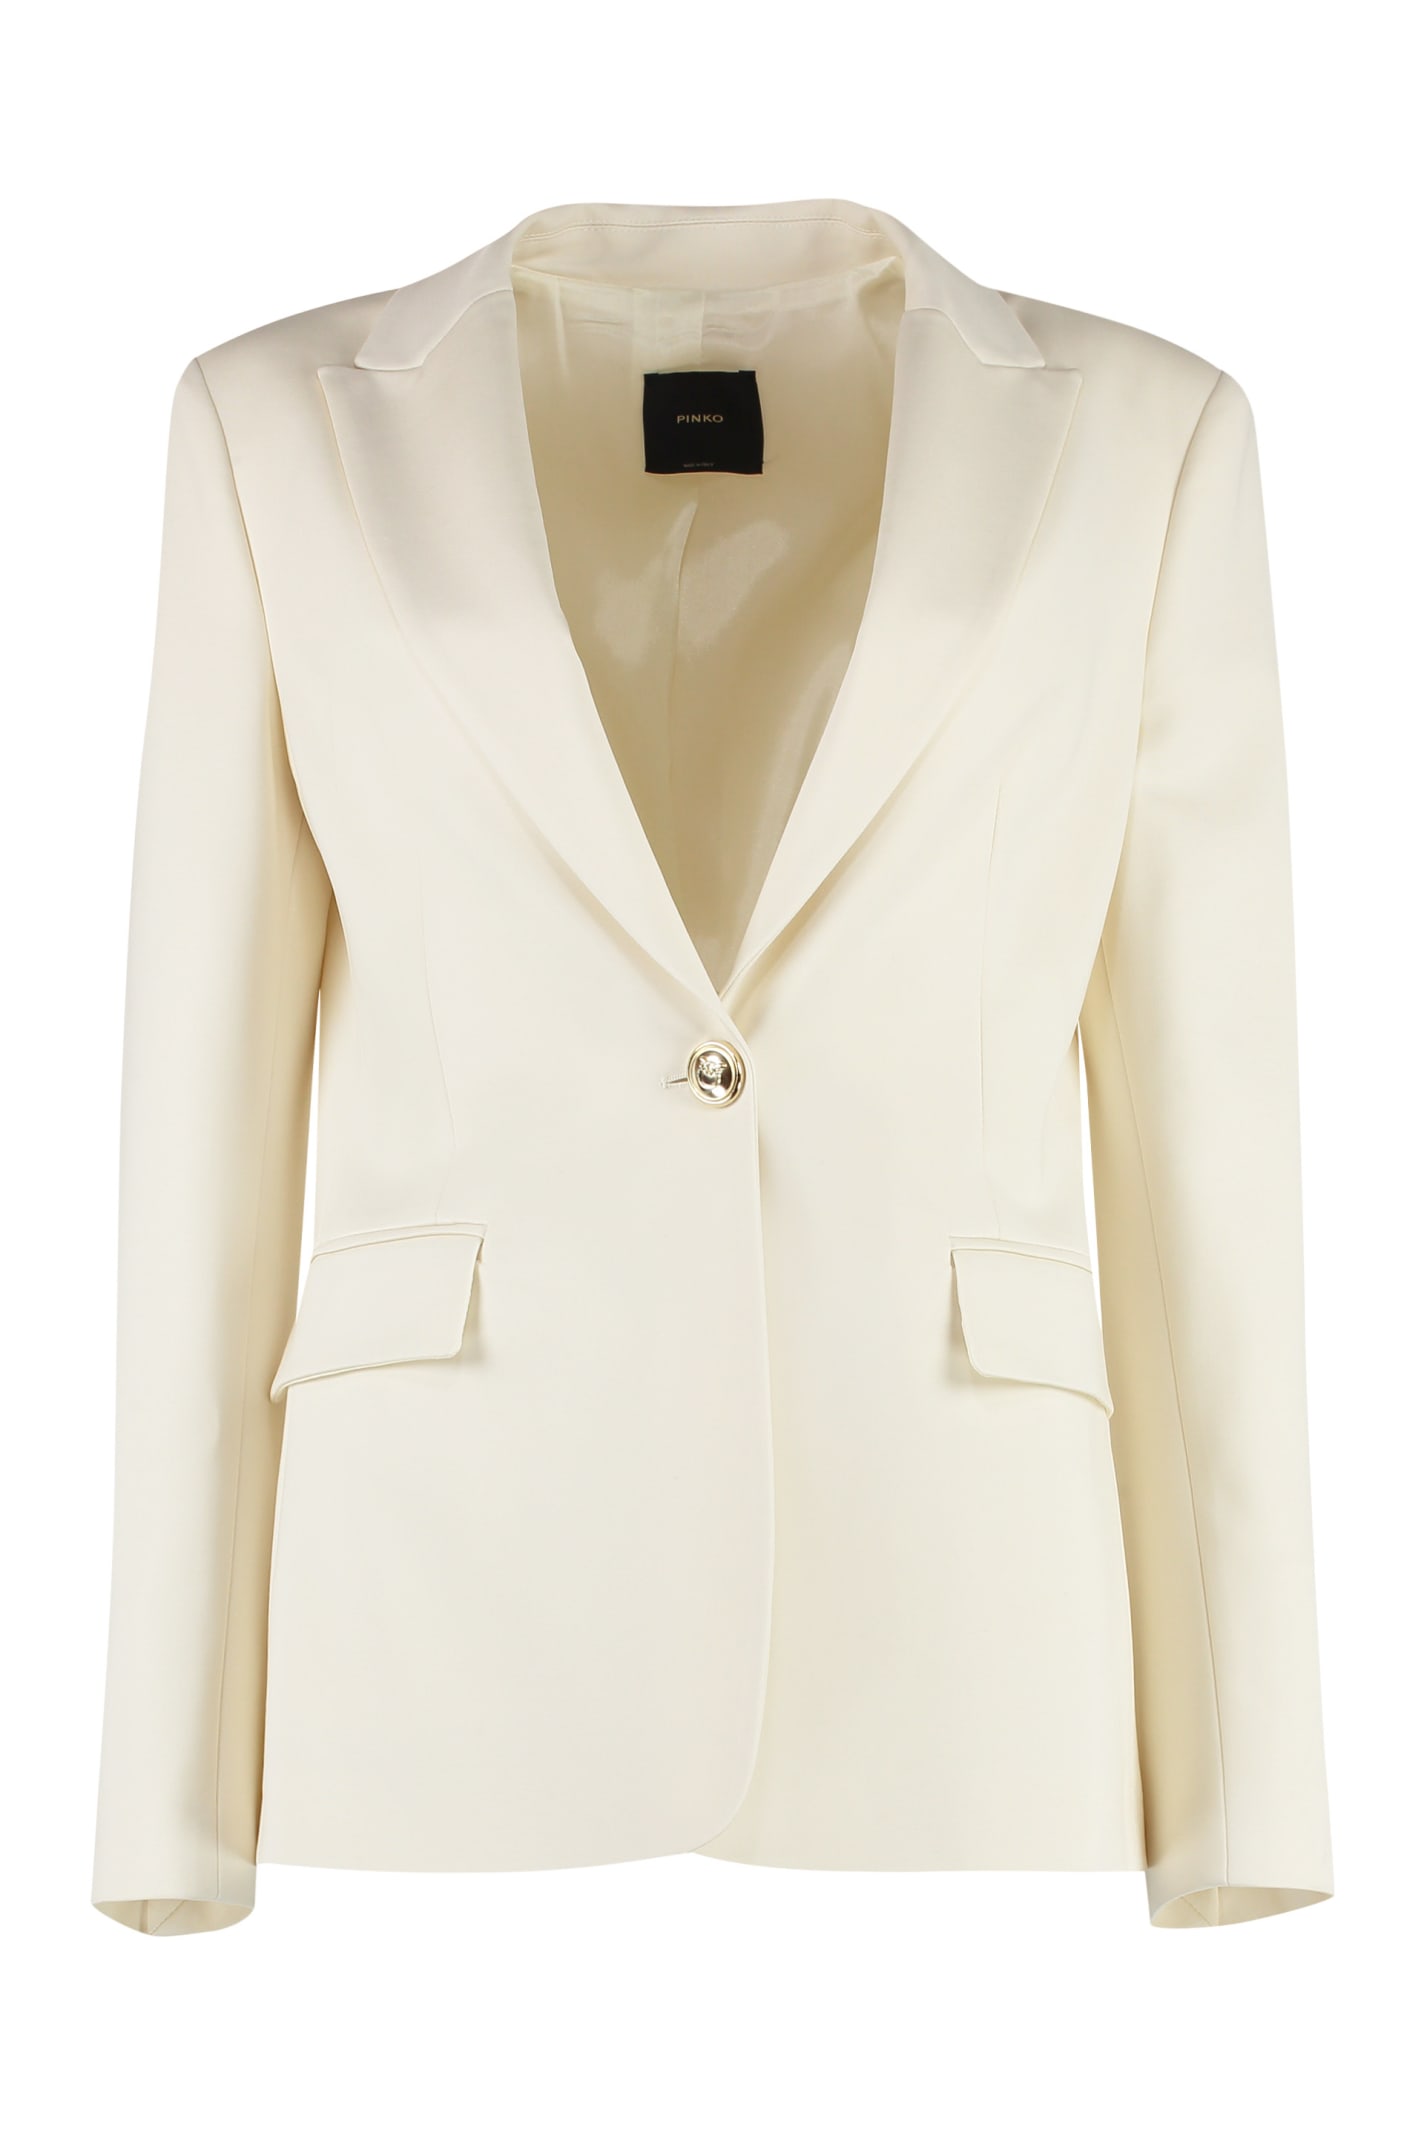 PINKO SINGLE-BREASTED ONE BUTTON JACKET